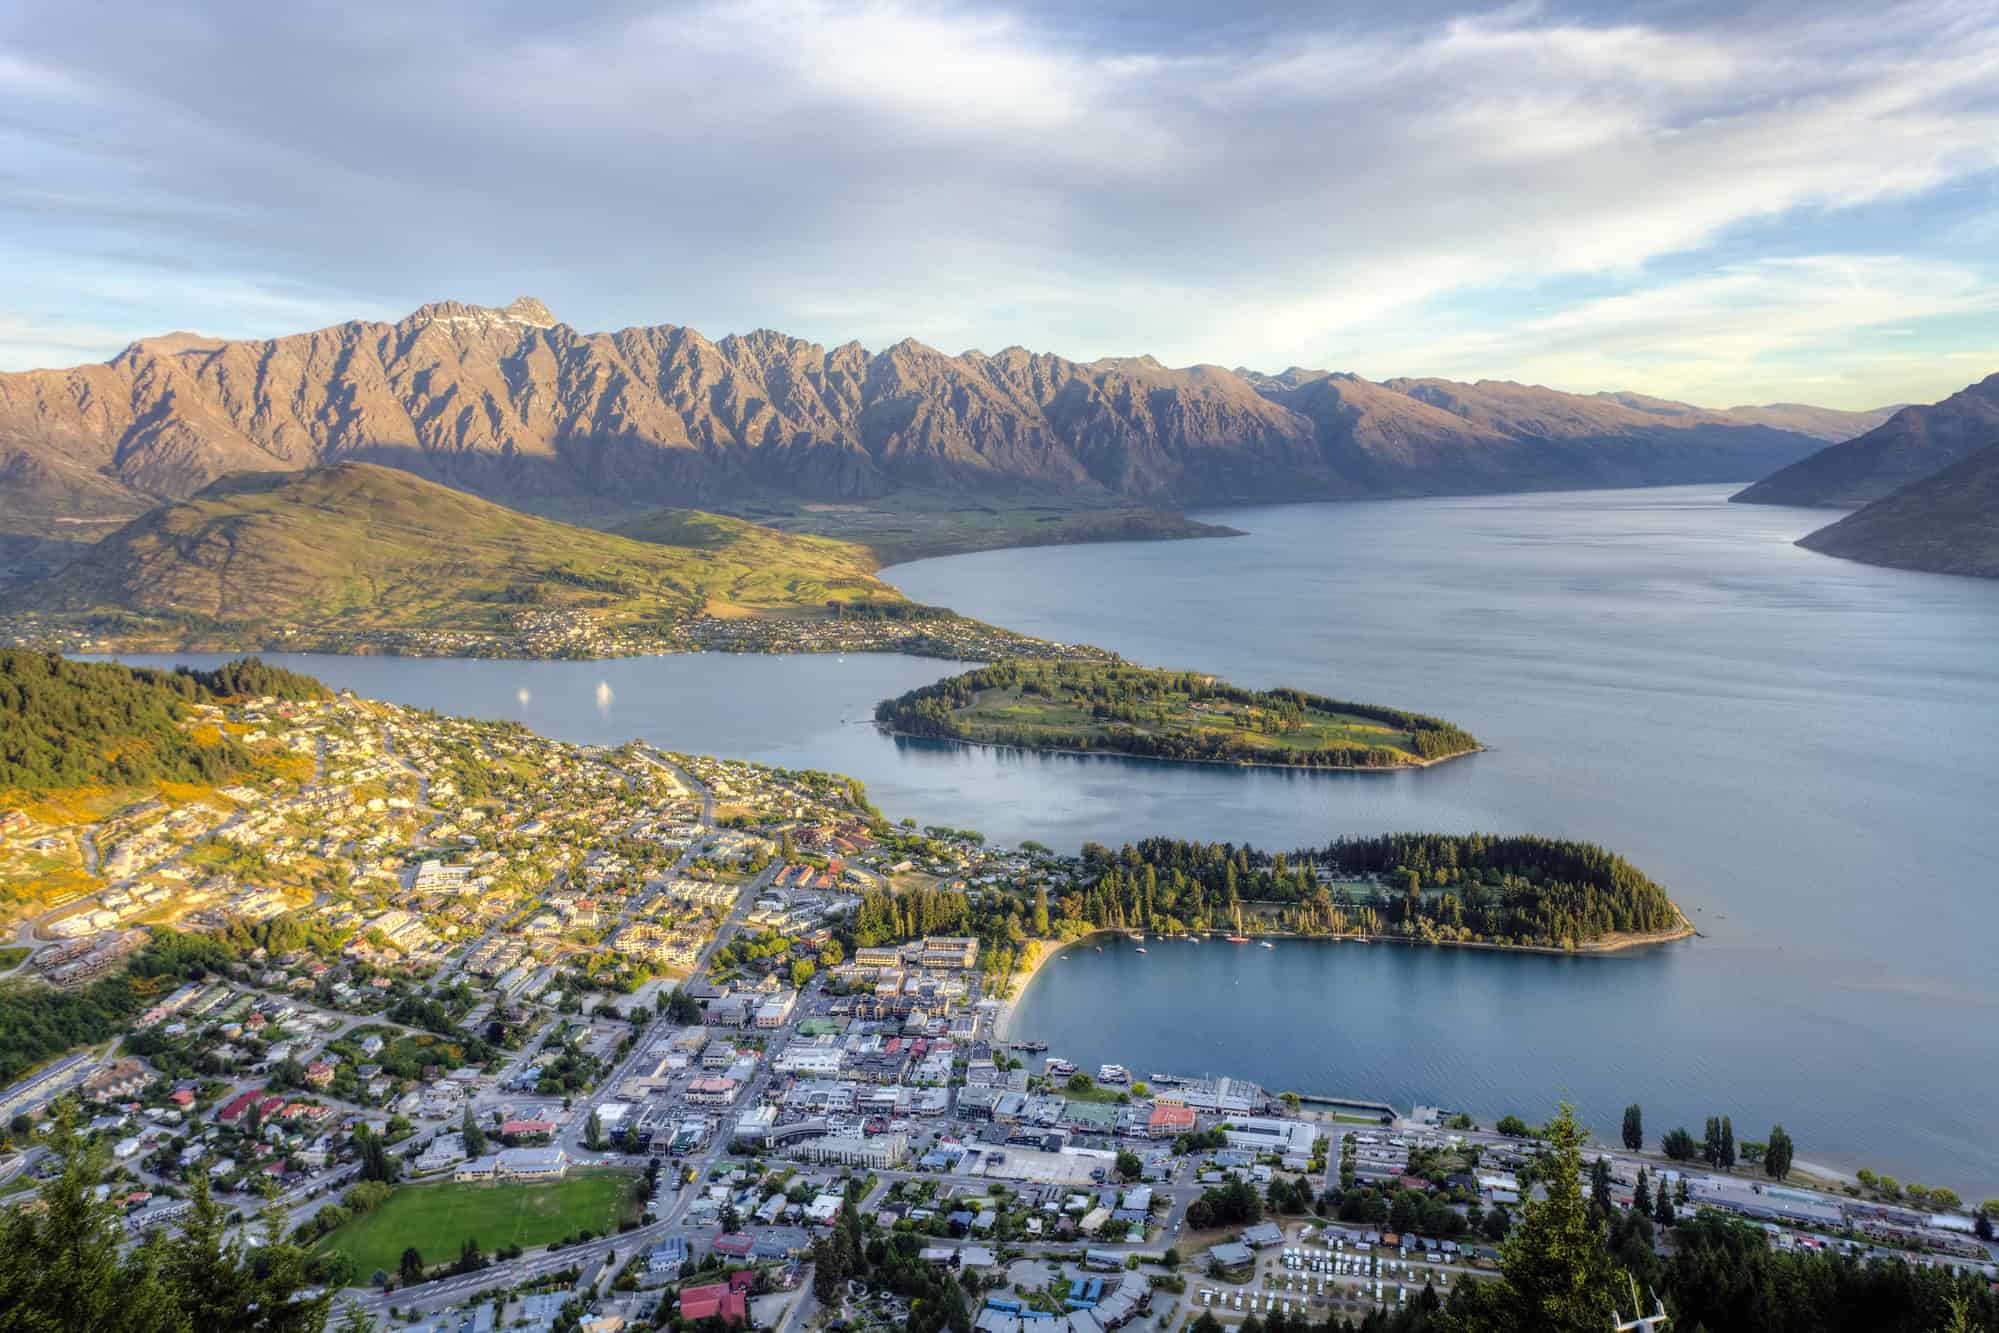 <p>Experience the thrill of jet boating in Queenstown, New Zealand, where high-speed river rides meet stunning alpine scenery. This adventure capital, nestled along Lake Wakatipu and encircled by the majestic Southern Alps, is famed for its exhilarating jet boat excursions through the narrow canyons of the Shotover and Kawarau Rivers. </p> <p>Originating in the 1950s thanks to New Zealand engineer Sir William Hamilton, jet boating offers heart-pounding maneuvers through awesome landscapes. Whether it’s zipping around tight bends or spinning in 360 degrees, Queenstown’s combination of natural beauty and cutting-edge water sports technology offers an unmatched adrenaline rush.</p>